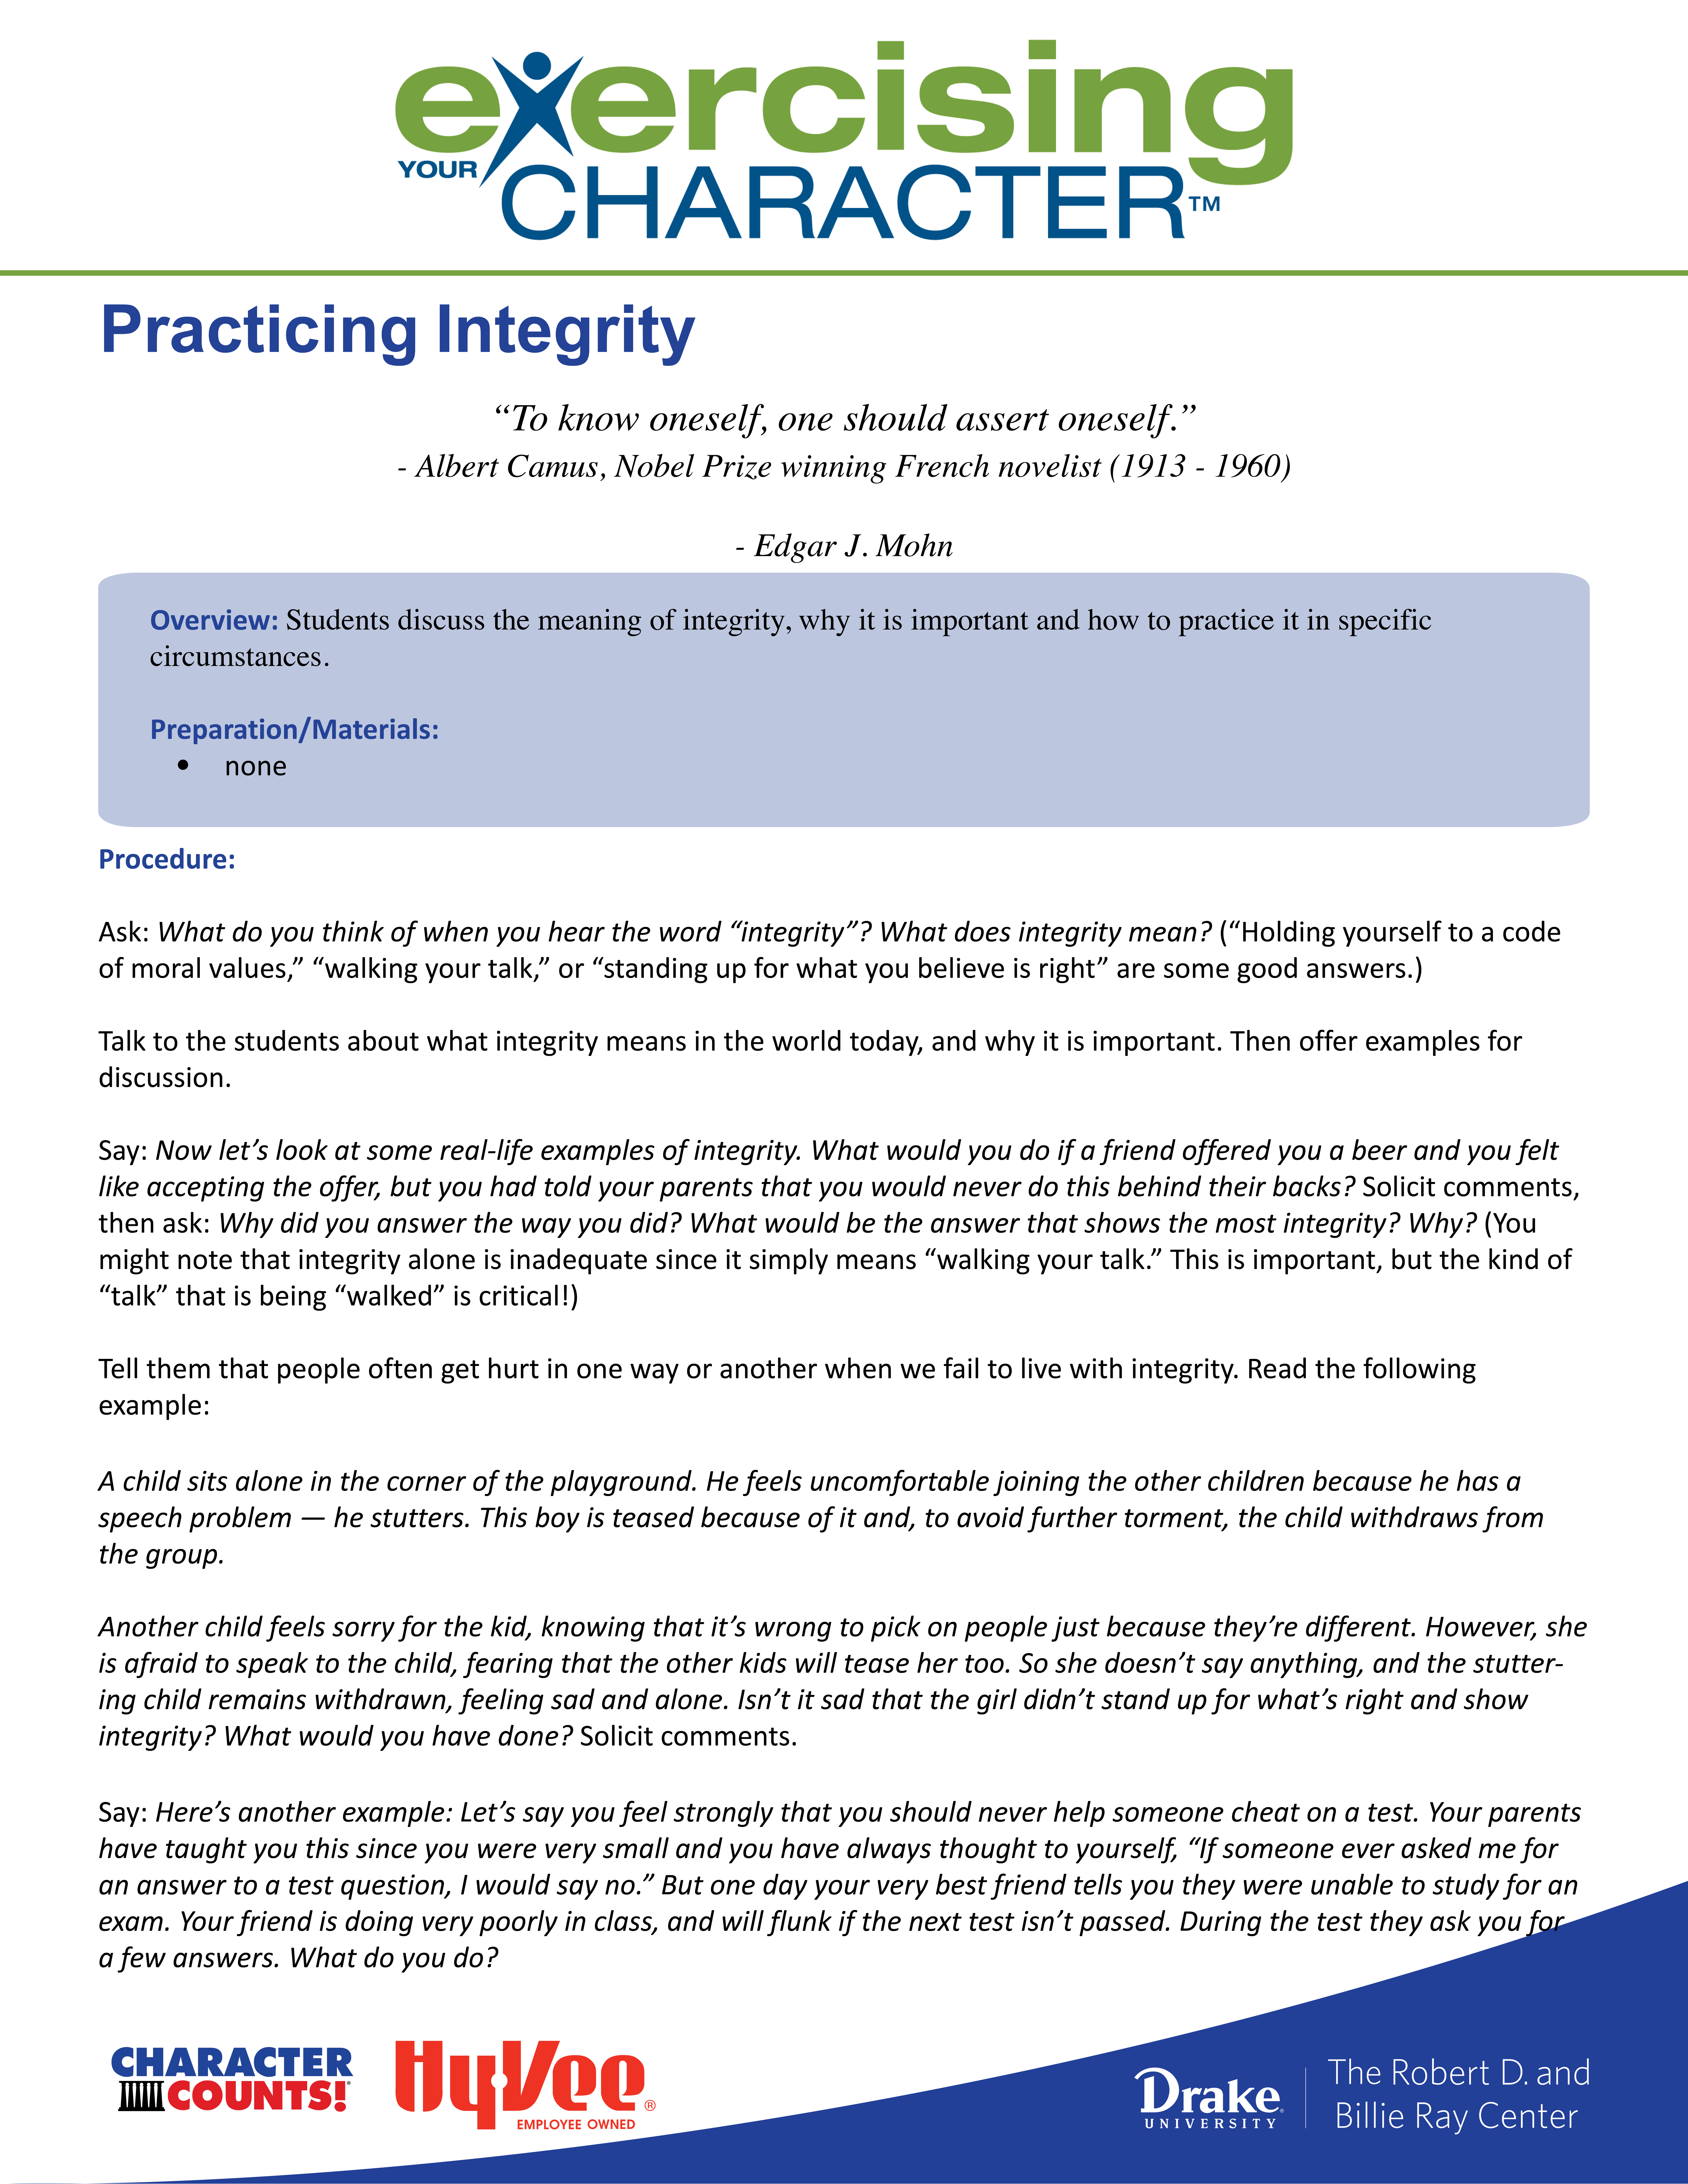 Exercising Your Character - Practicing Integrity